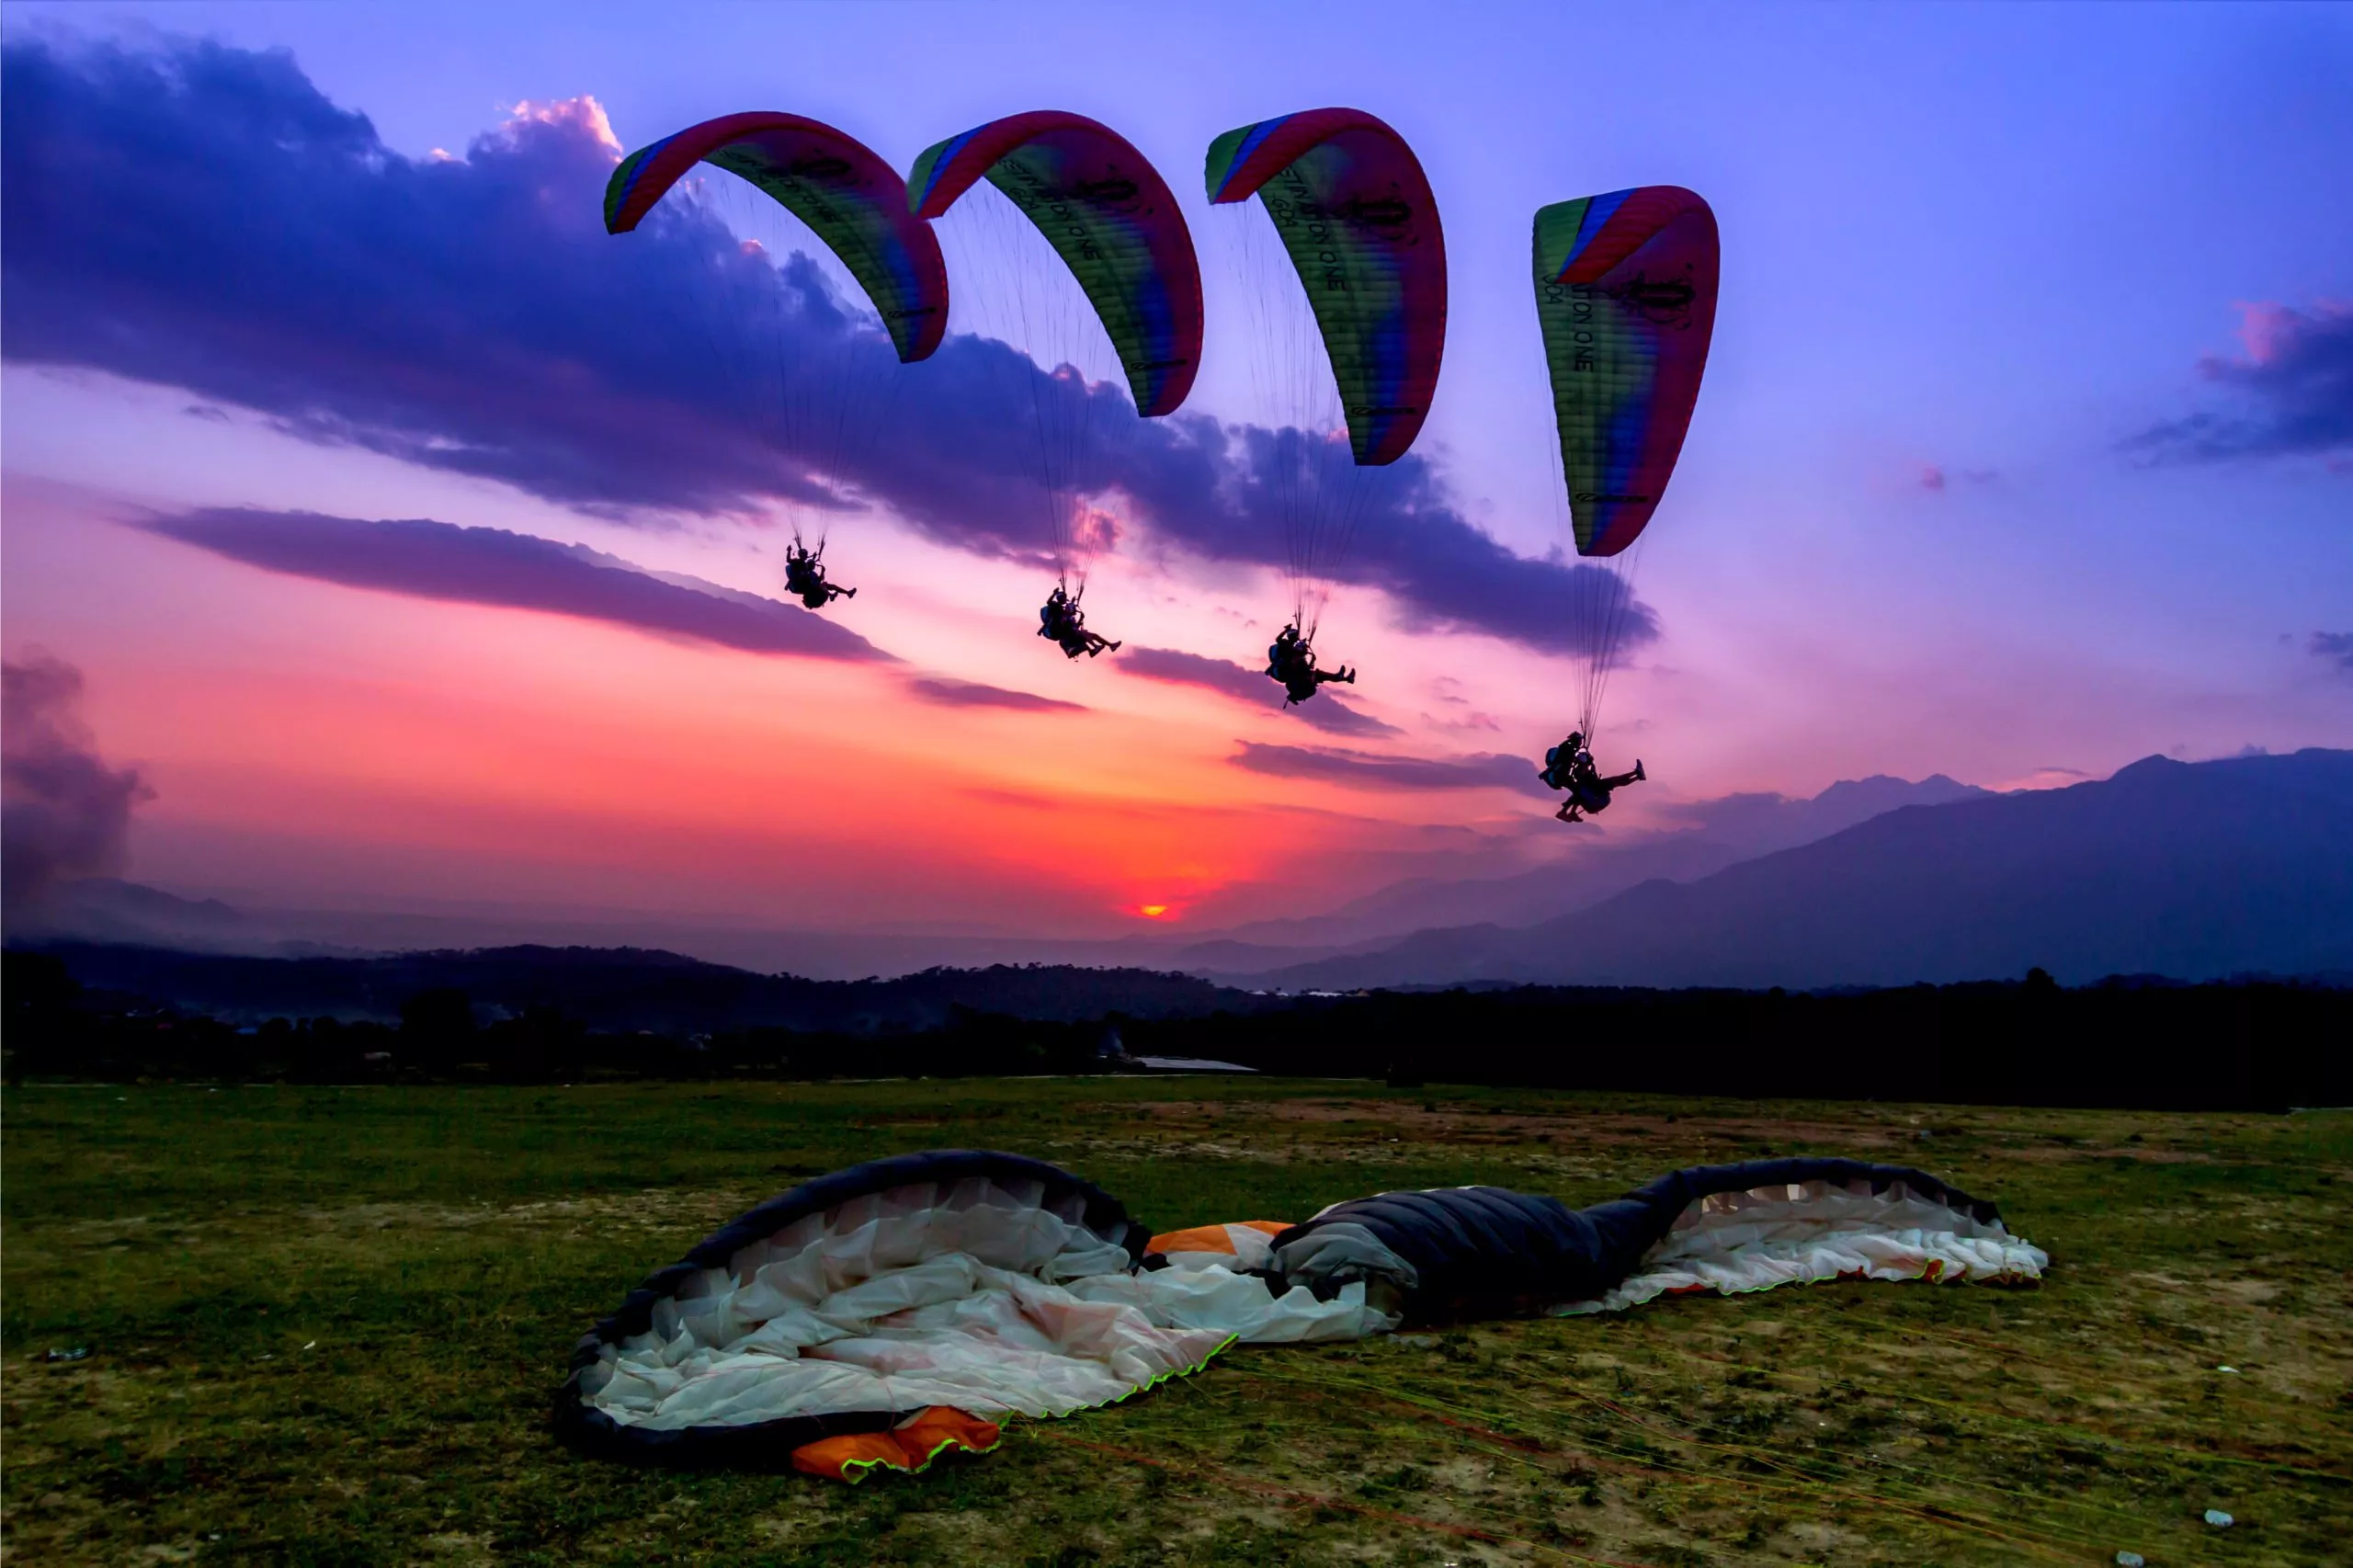 Sunrise Paragliding in Nepal, Central Asia | Paragliding - Rated 1.2